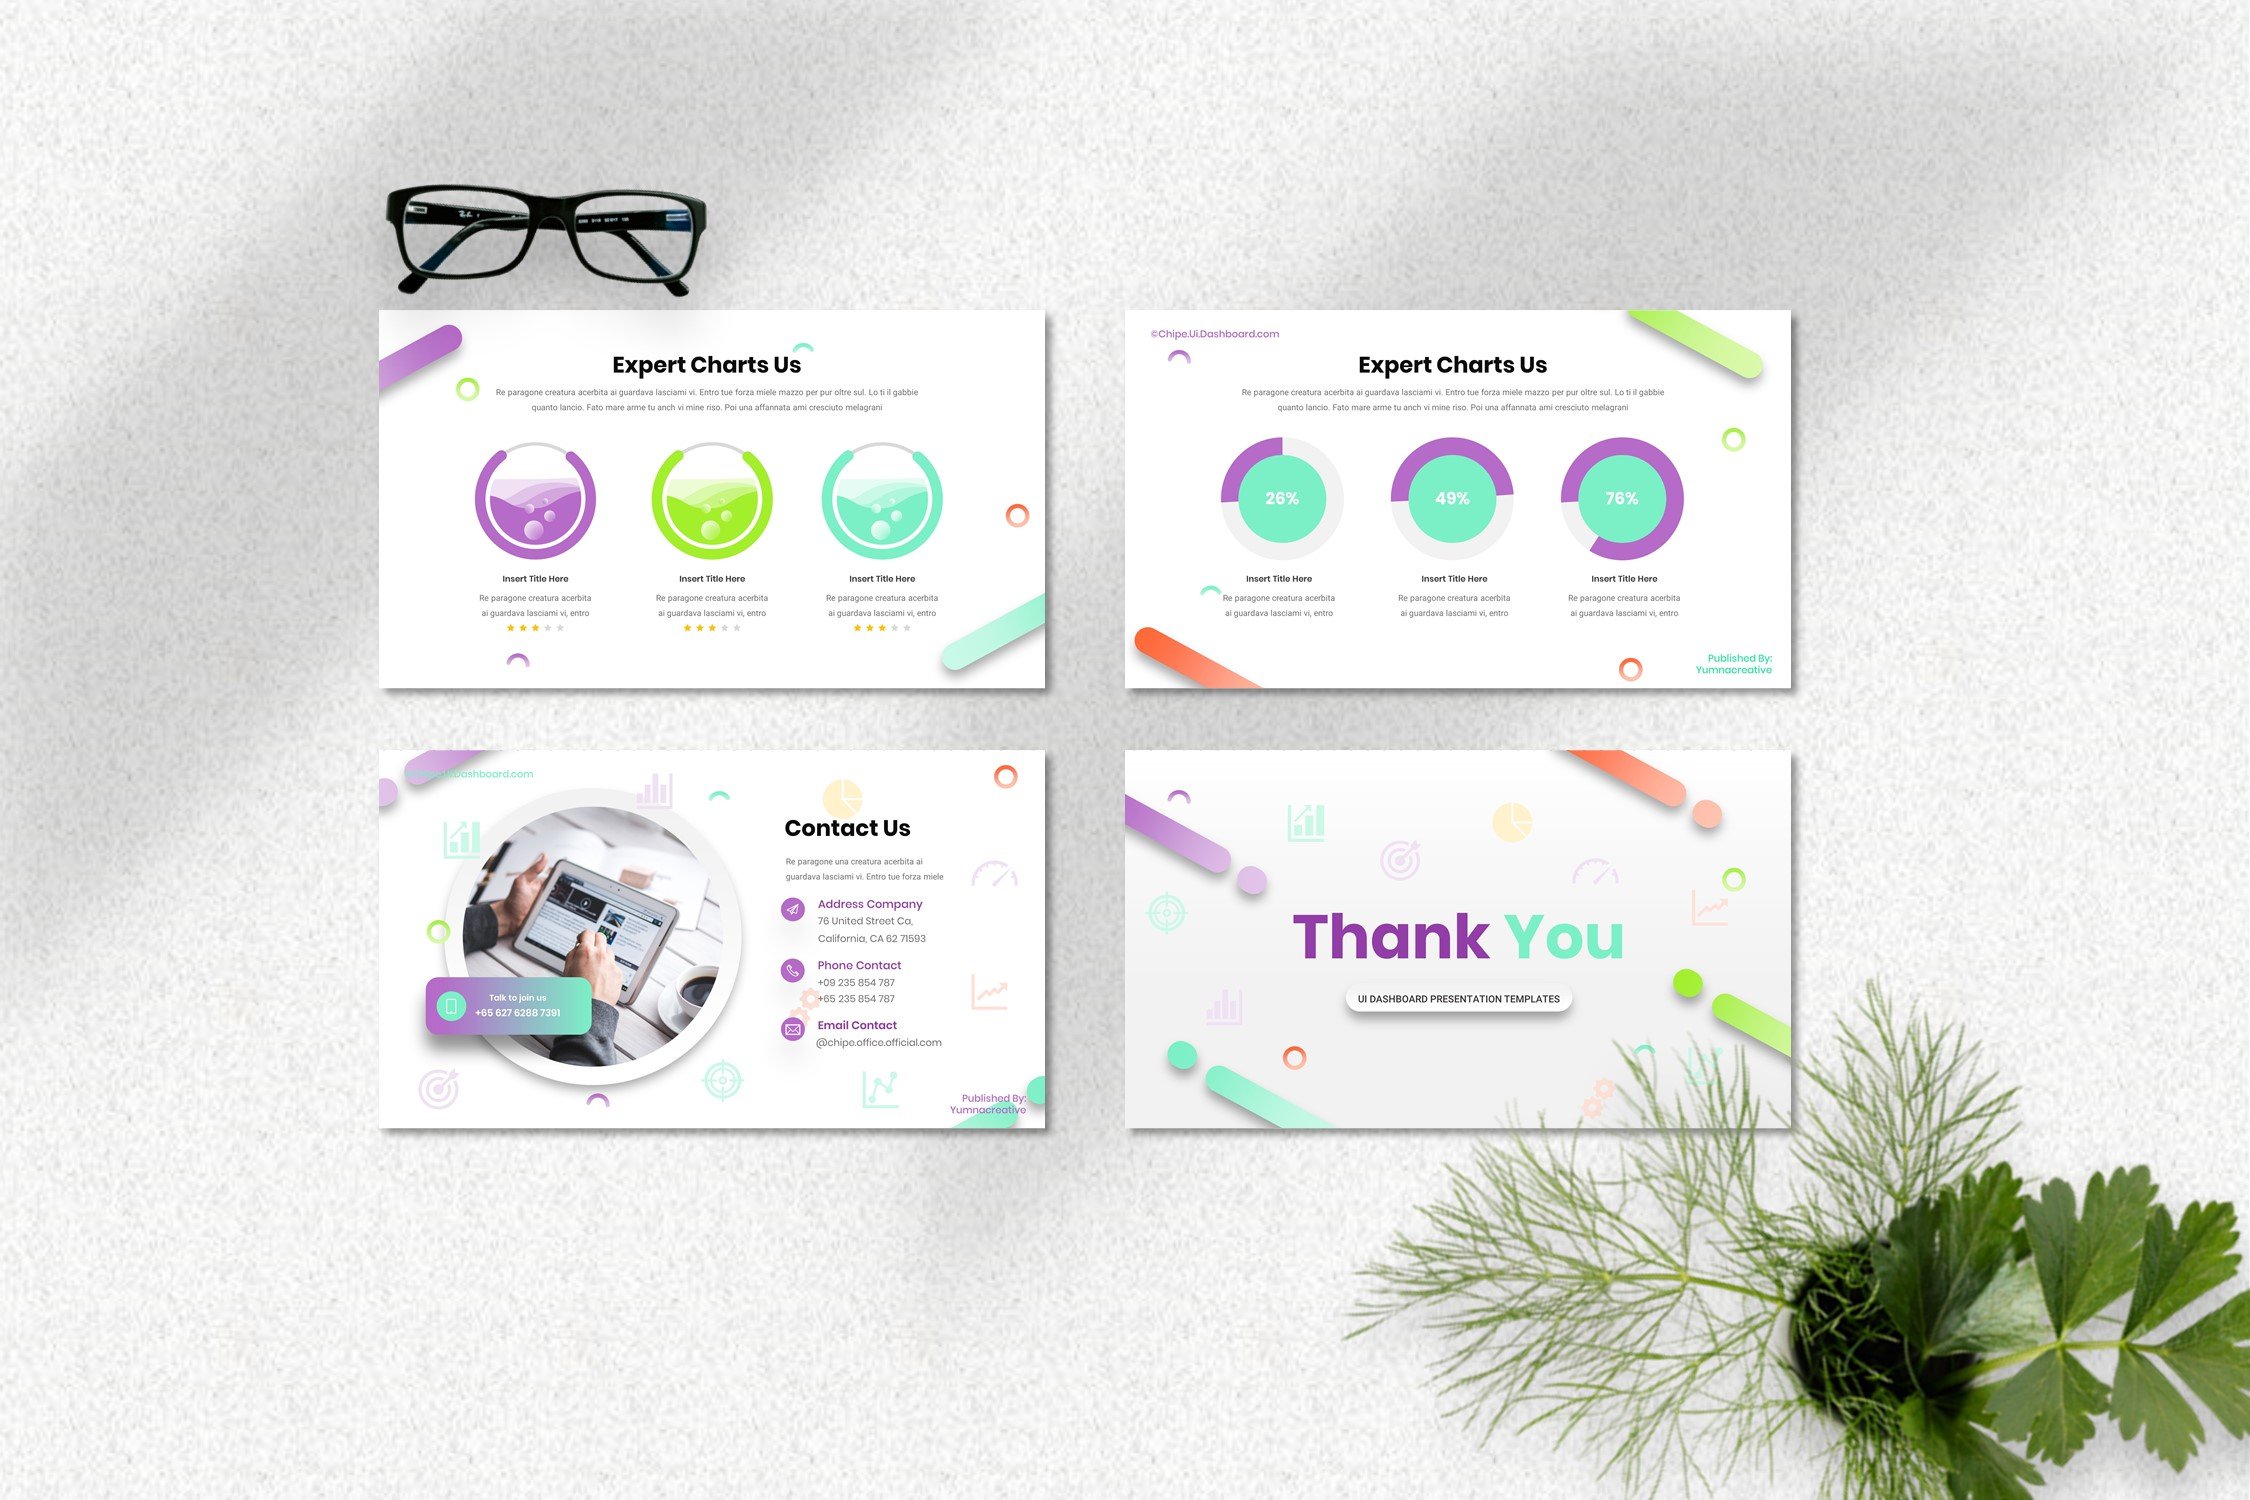 Templates includes the themed infographics and graphics.